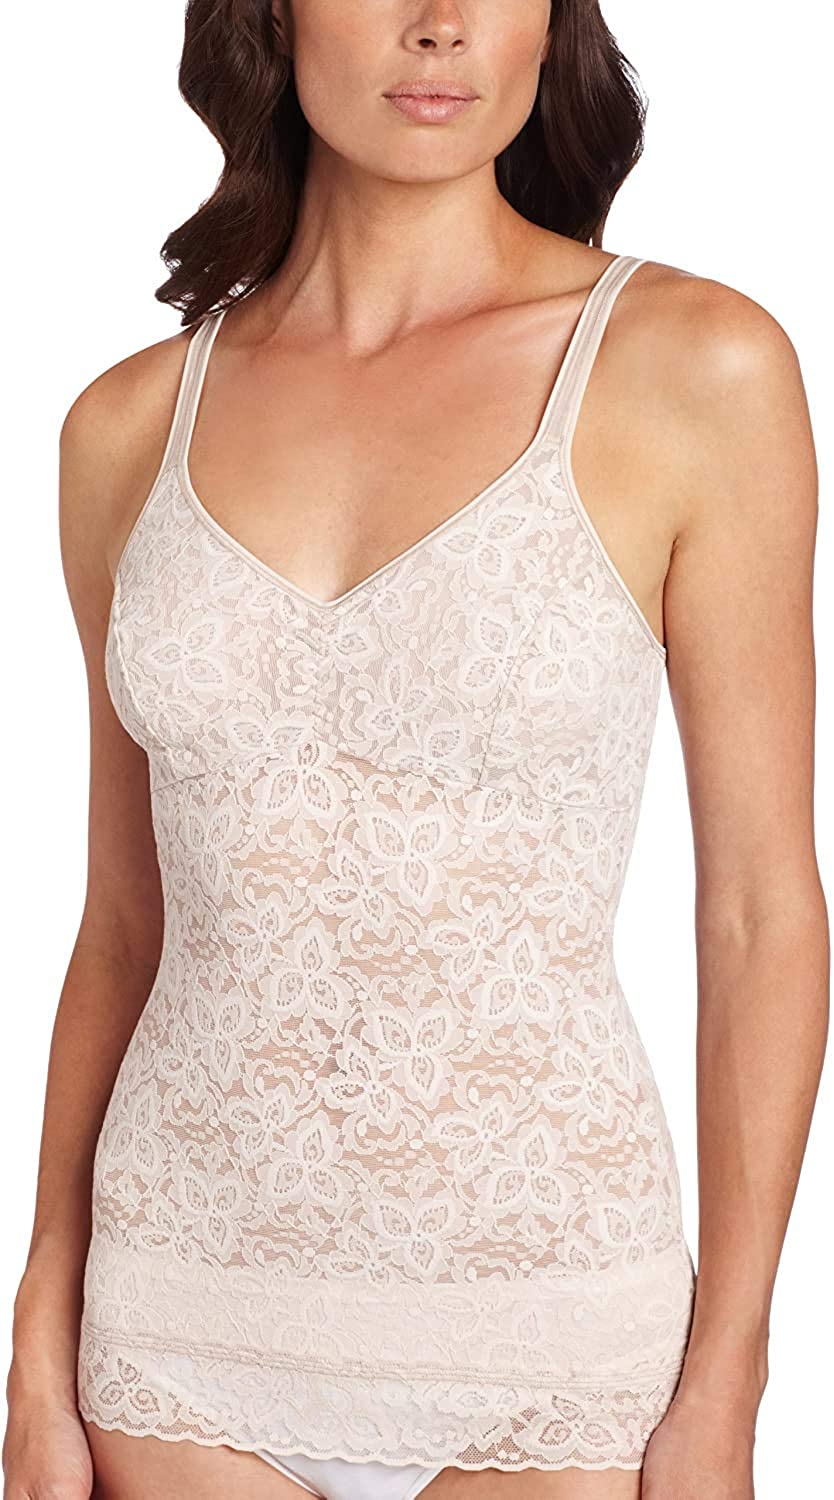 Bali Women’s Shapewear Firm Control Lace ’N Smooth Shaping Cami